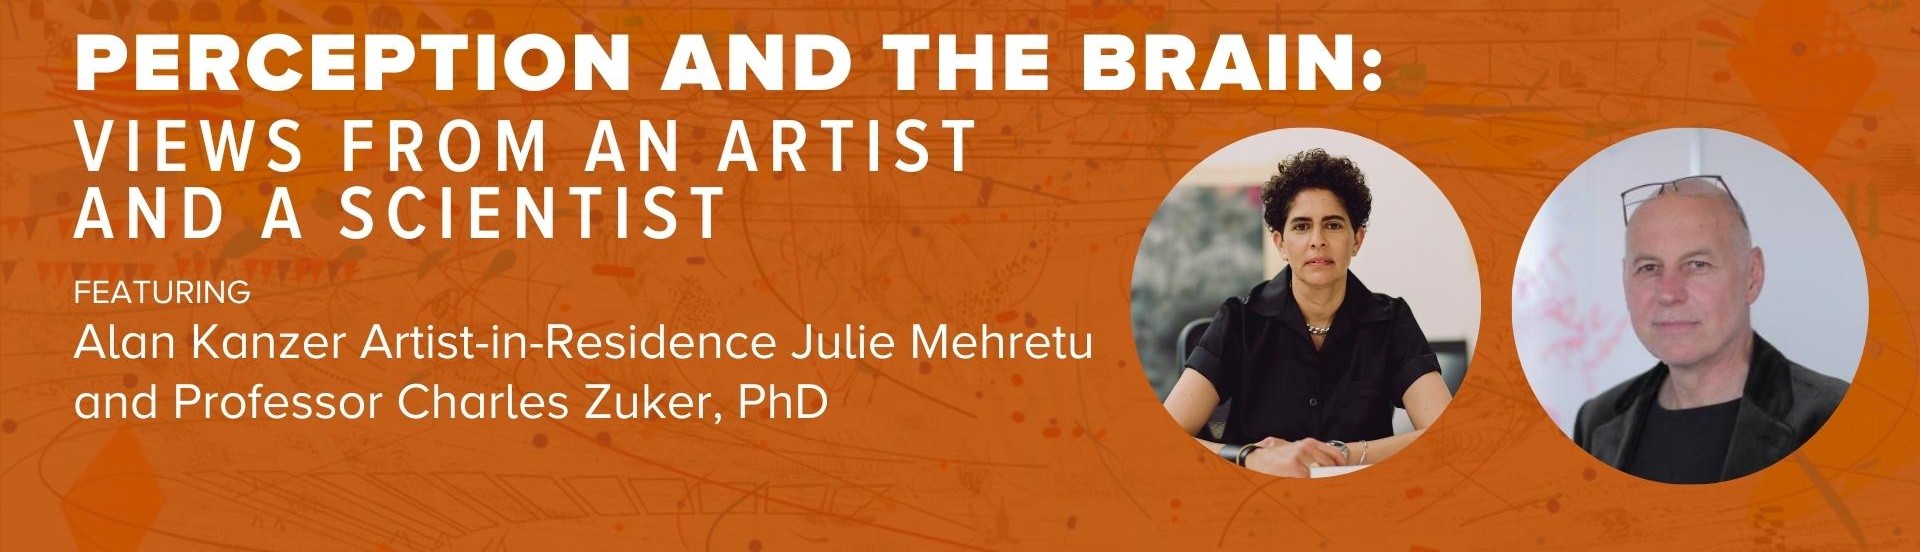 Picture that says Perception and The Brain: Views From an Artist and a Scientist Featuring Alan Kanzer Artist-in-Residence Julie Mehretu and Professor Charles Zuker, PhD.